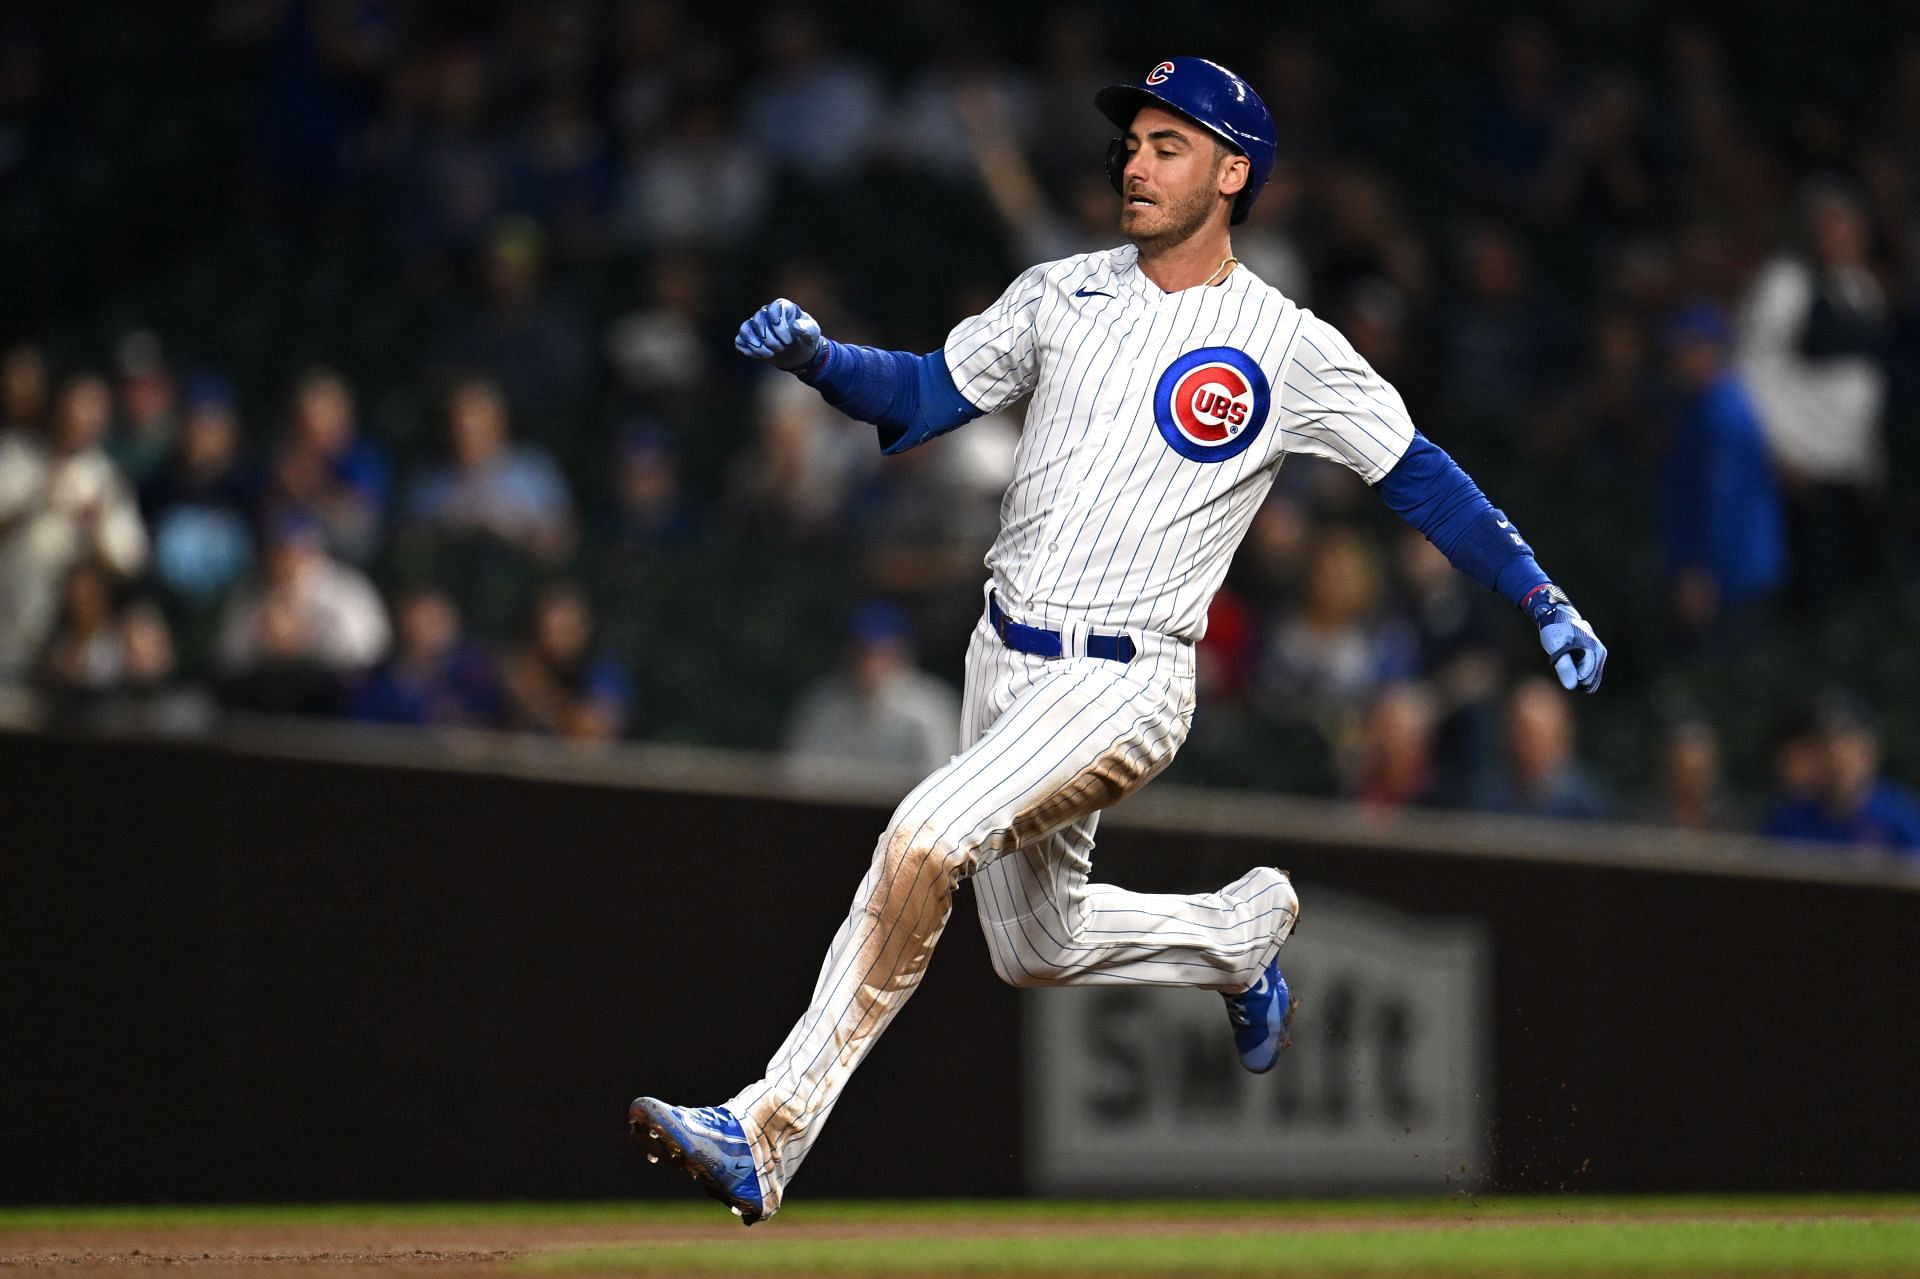 Bellinger&lsquo;s reported asking price of $200 million could be a hurdle for the Mariners, but their need for offensive firepower may drive them to explore the possibility.